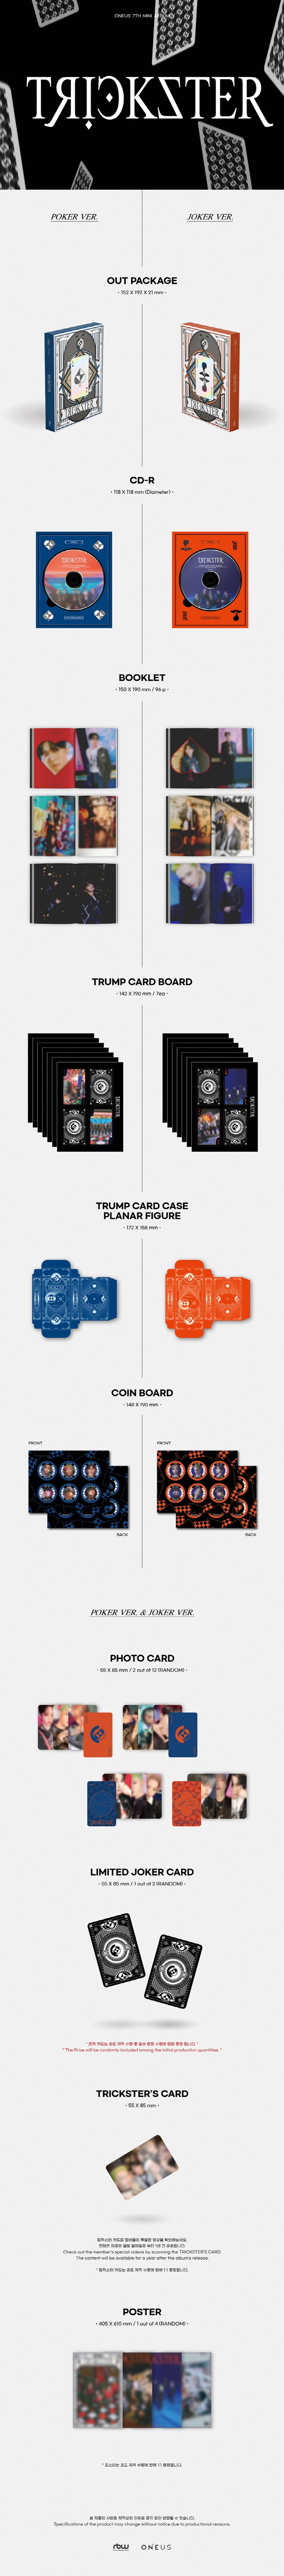 1 CD
1 Booklet
7 Trump Card Boards
1 Trump Card Case
1 Coin Board
2 Photo Cards (random out of 12 types)